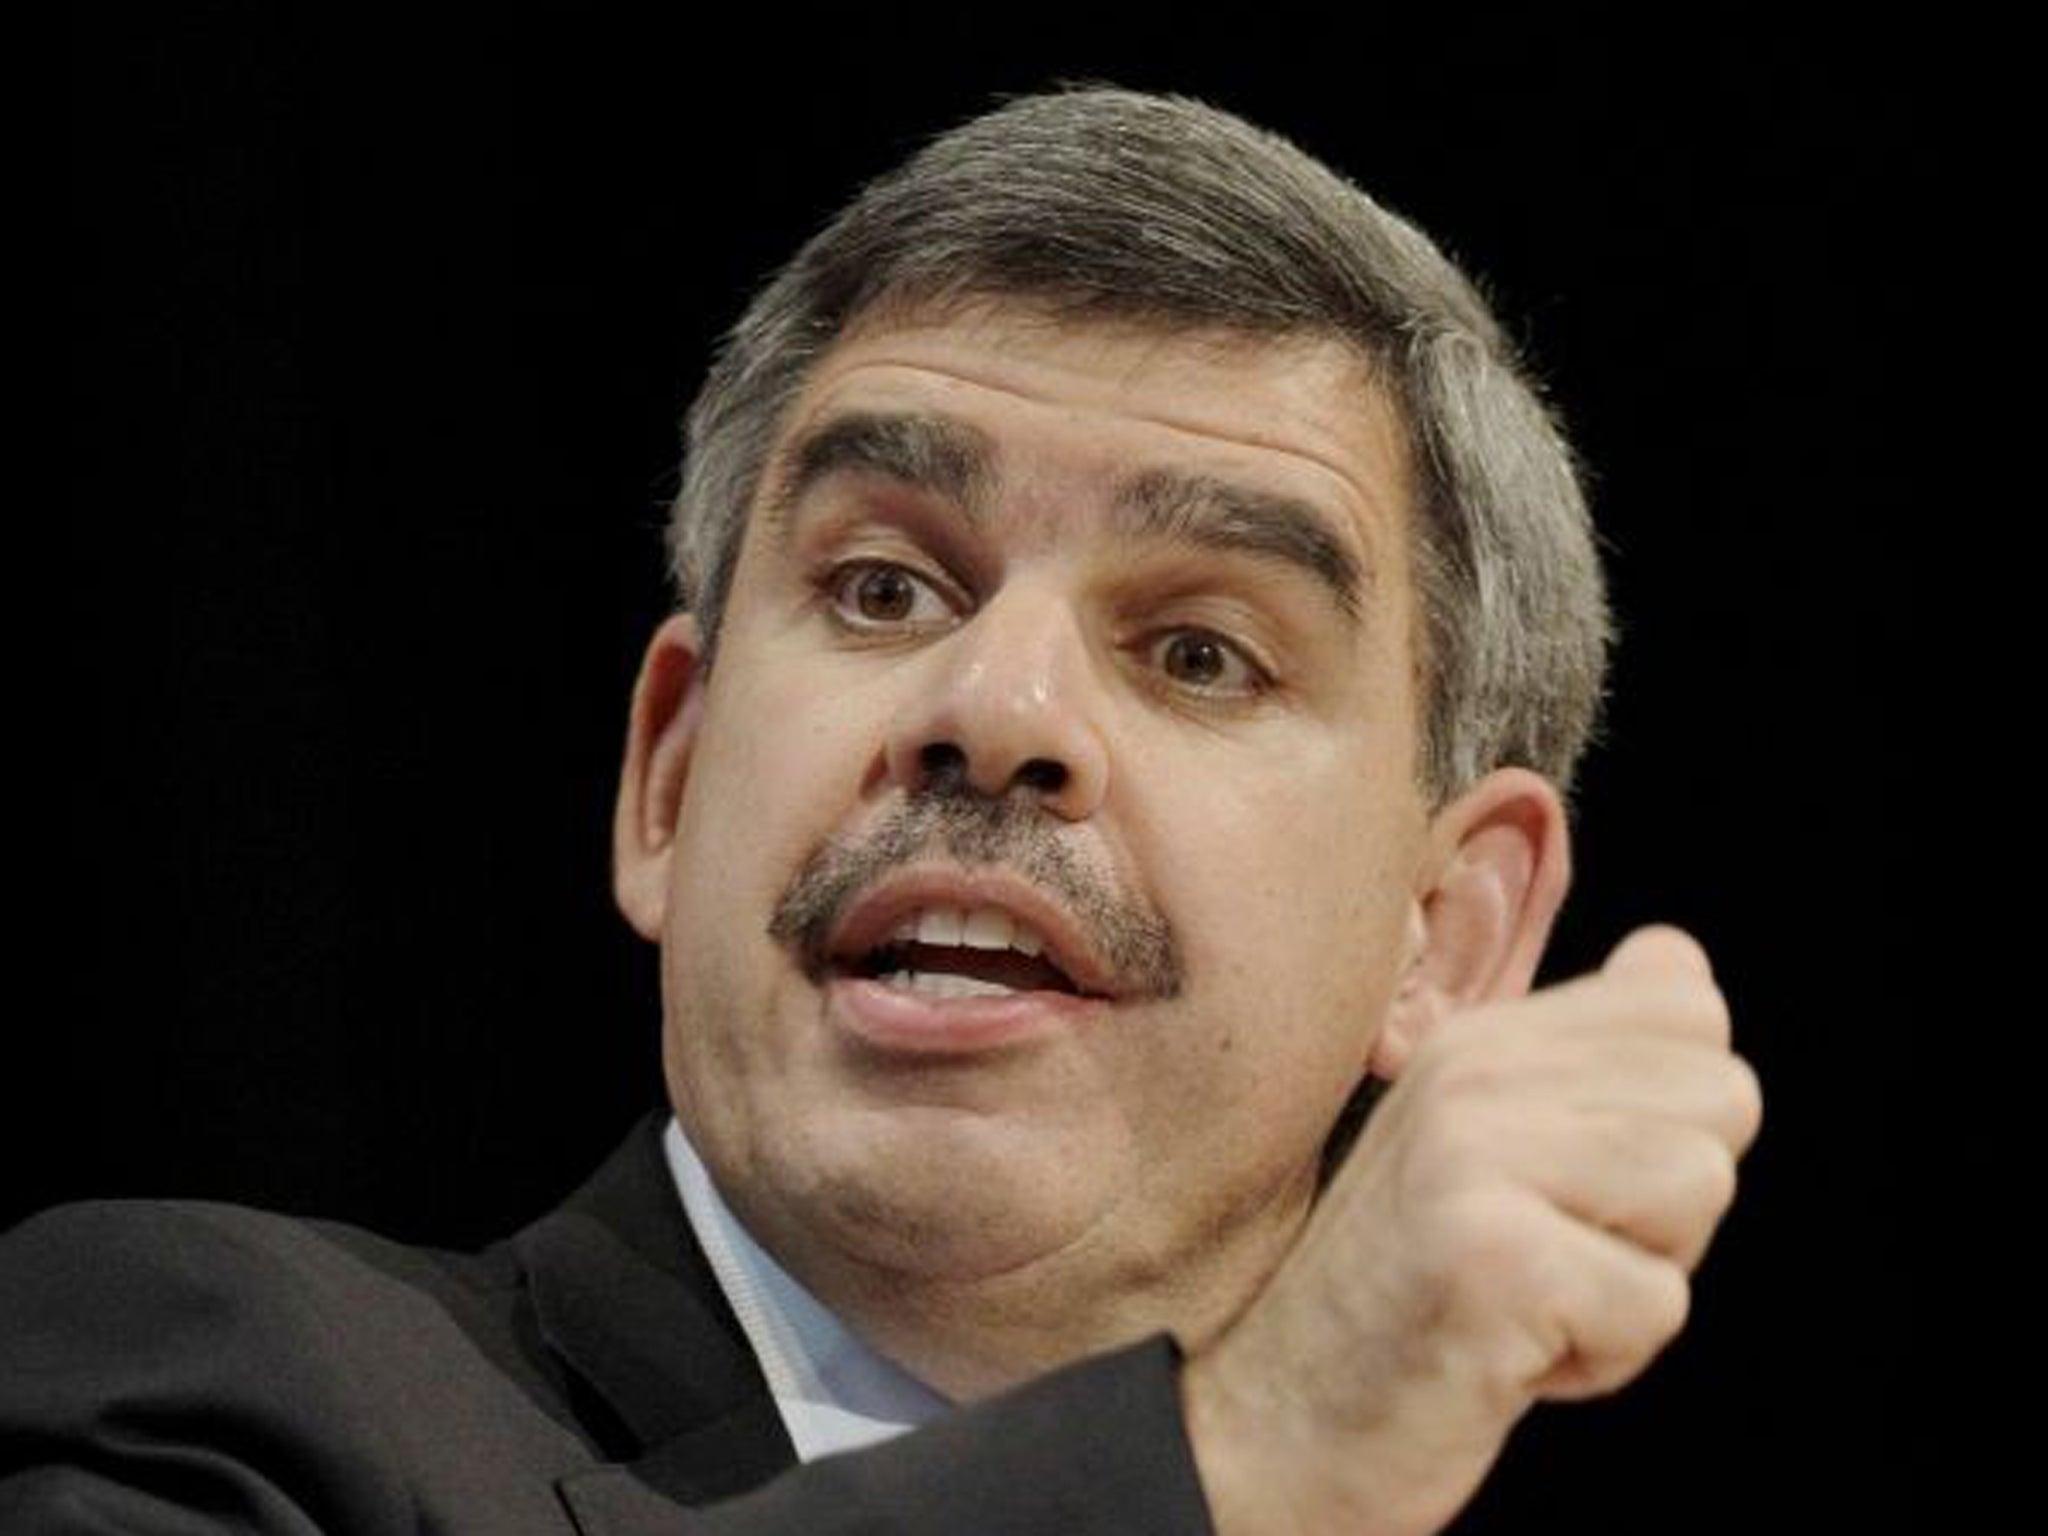 Mohamed El-Erian has been one of the most prominent commentators on finance and economics in the US financial news media in recent years